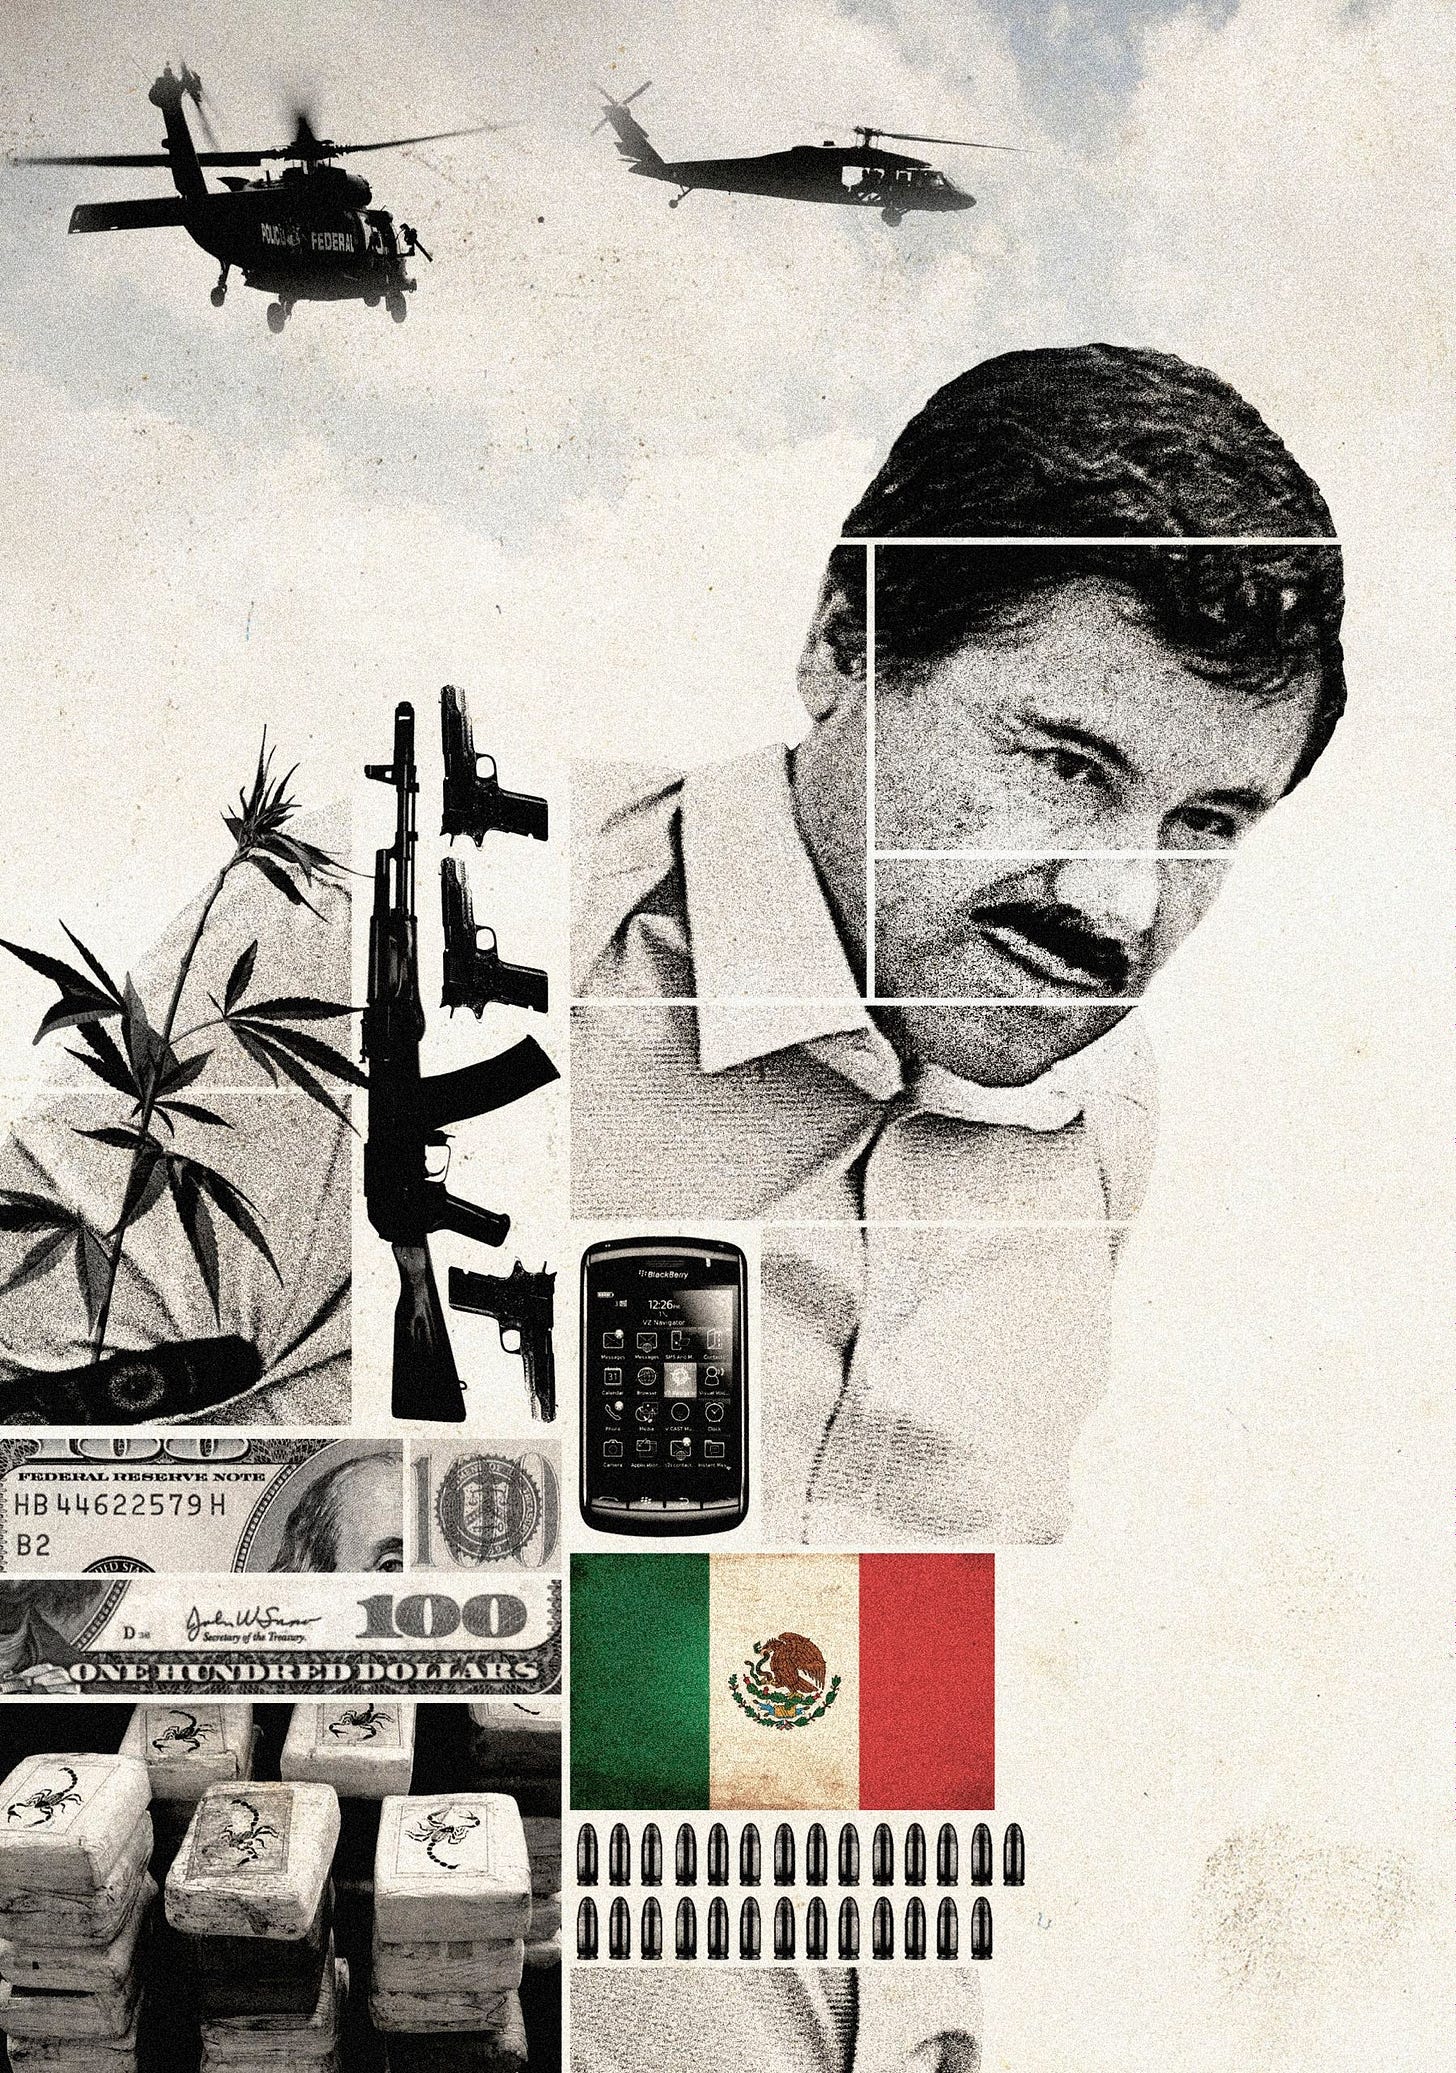 Composite photograph of drugs money guns bullets a flag a phone and El Chapo